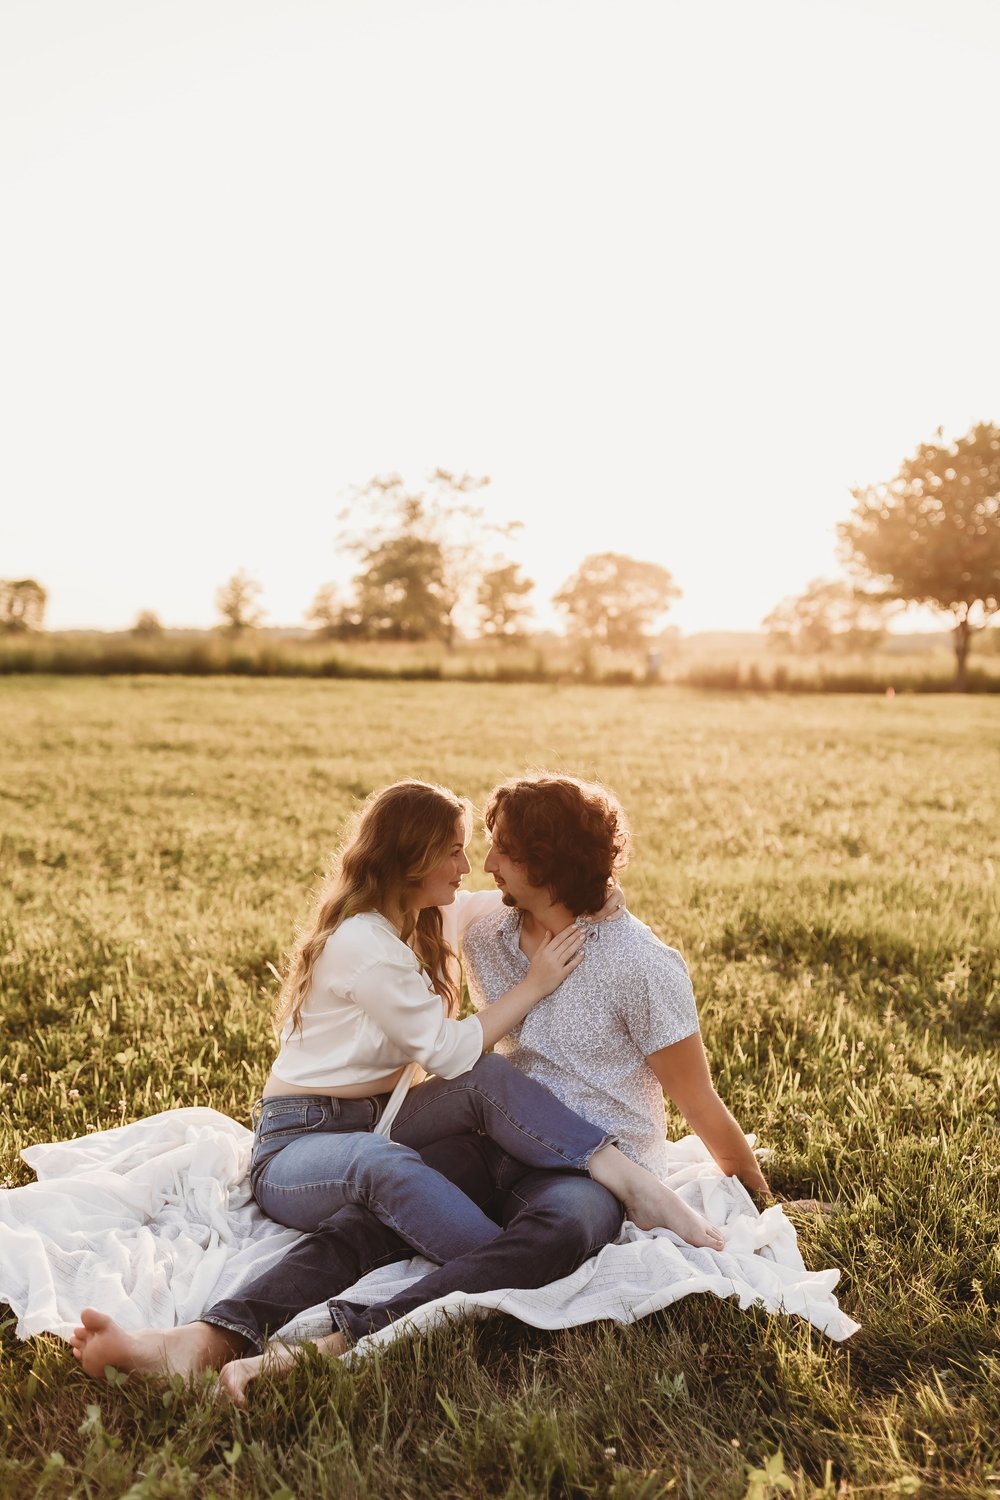  an engaged couple share a moment on a picnic blanket in a field as the sun sets behind them during their engagement photos 